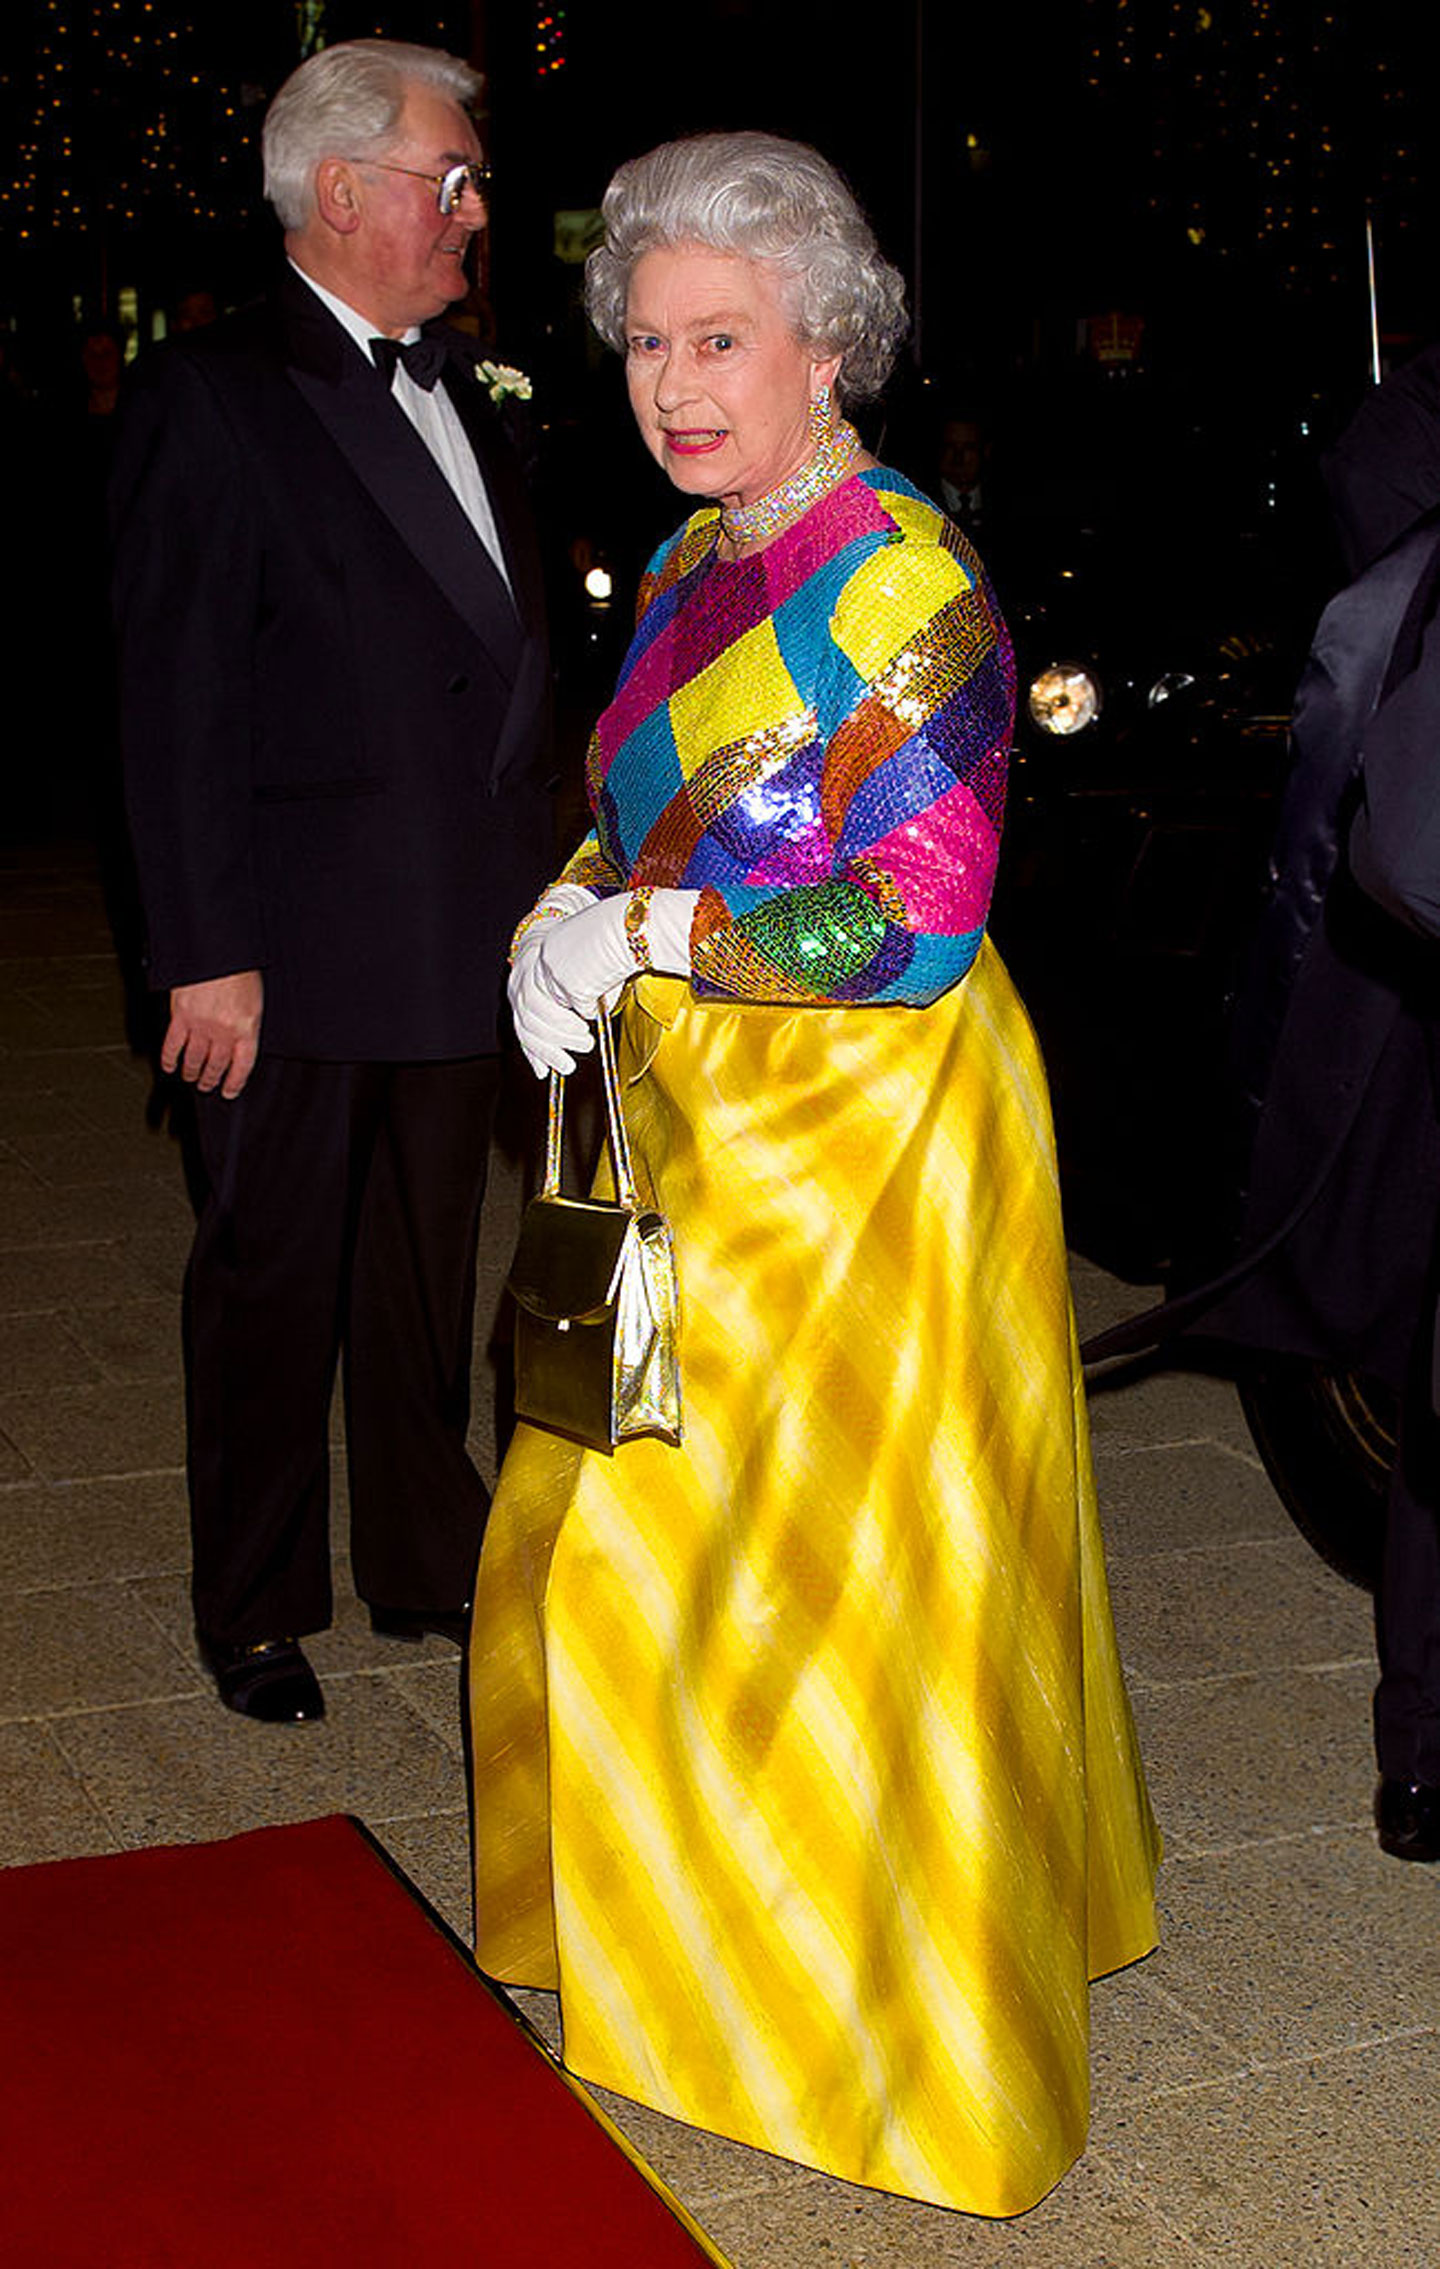 Queen Elizabeth II wearing one of her famous outfits, the "Harlequin Sequin Dress"